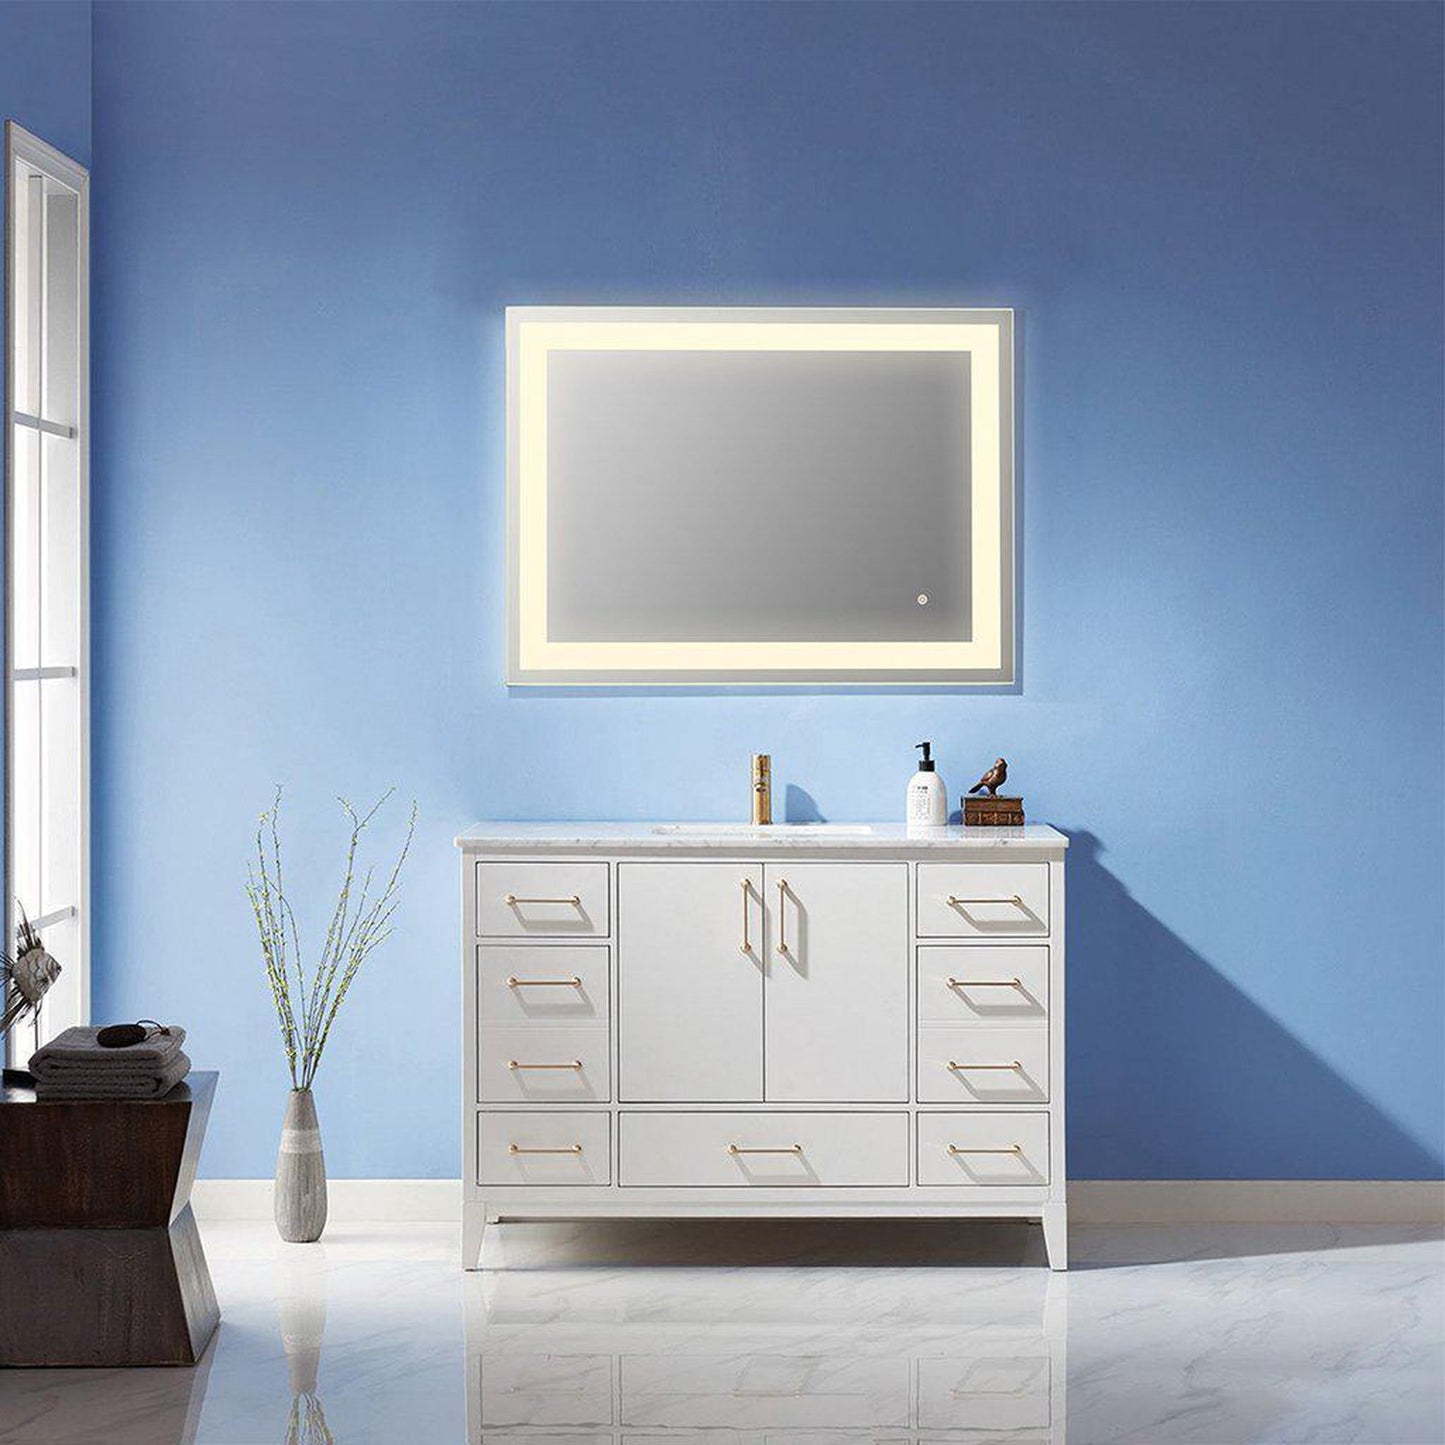 Altair Genova 40" Rectangle Wall-Mounted LED Mirror